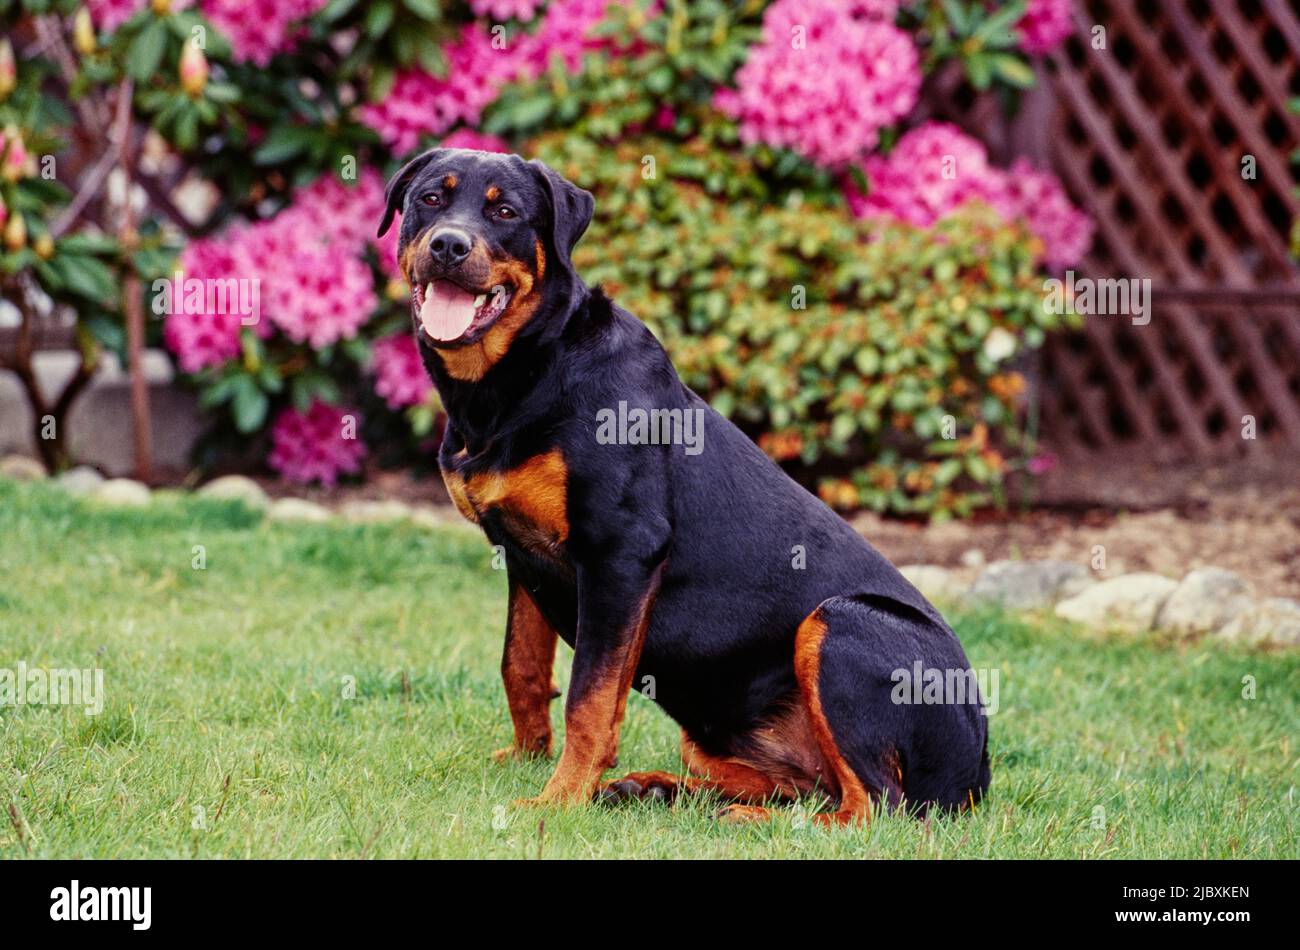 A rottweiler dog sitting in grass with pink flowers in the background Stock Photo